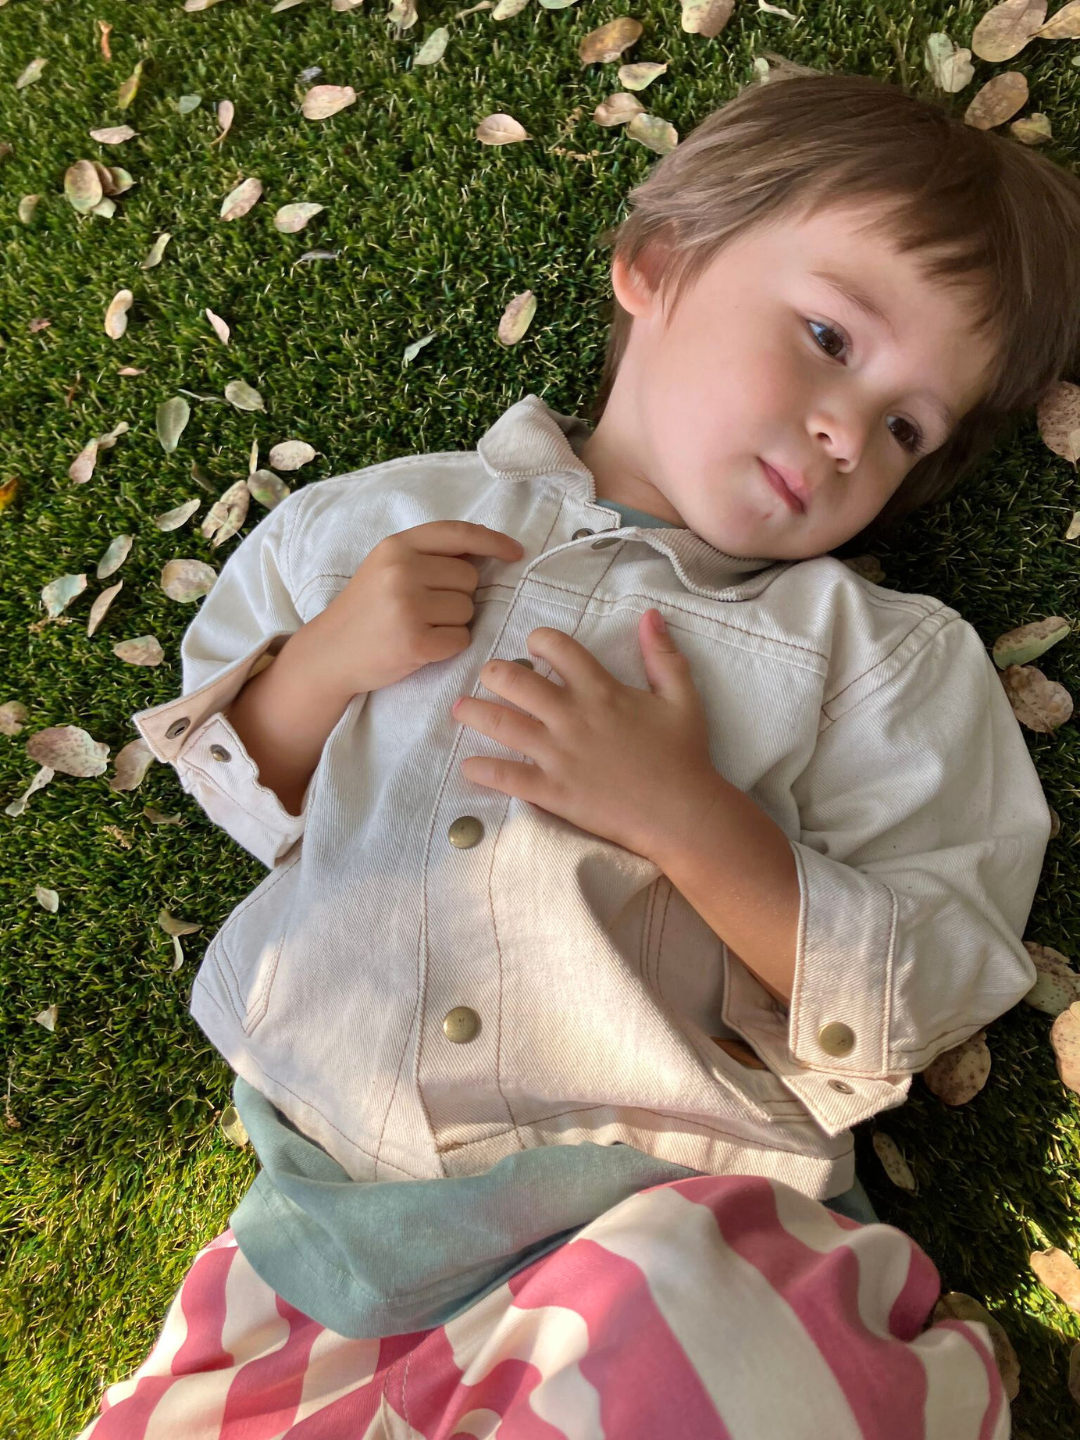 A kid laying on grass, wearing the Weekender Jacker in Natural.